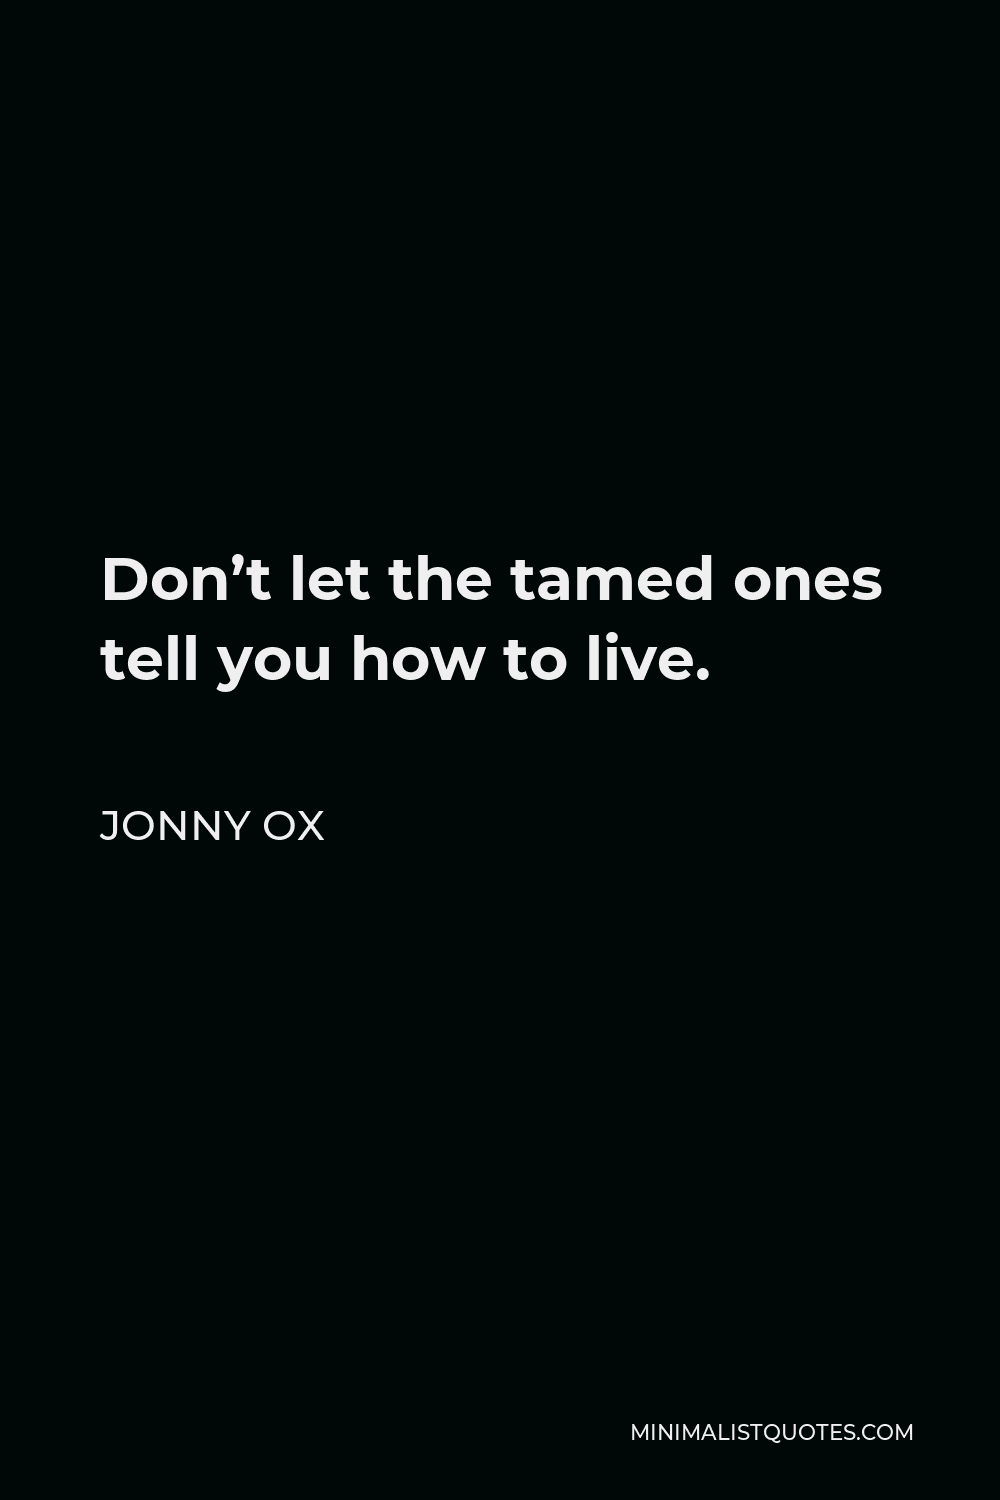 Jonny Ox Quote - Don’t let the tamed ones tell you how to live.